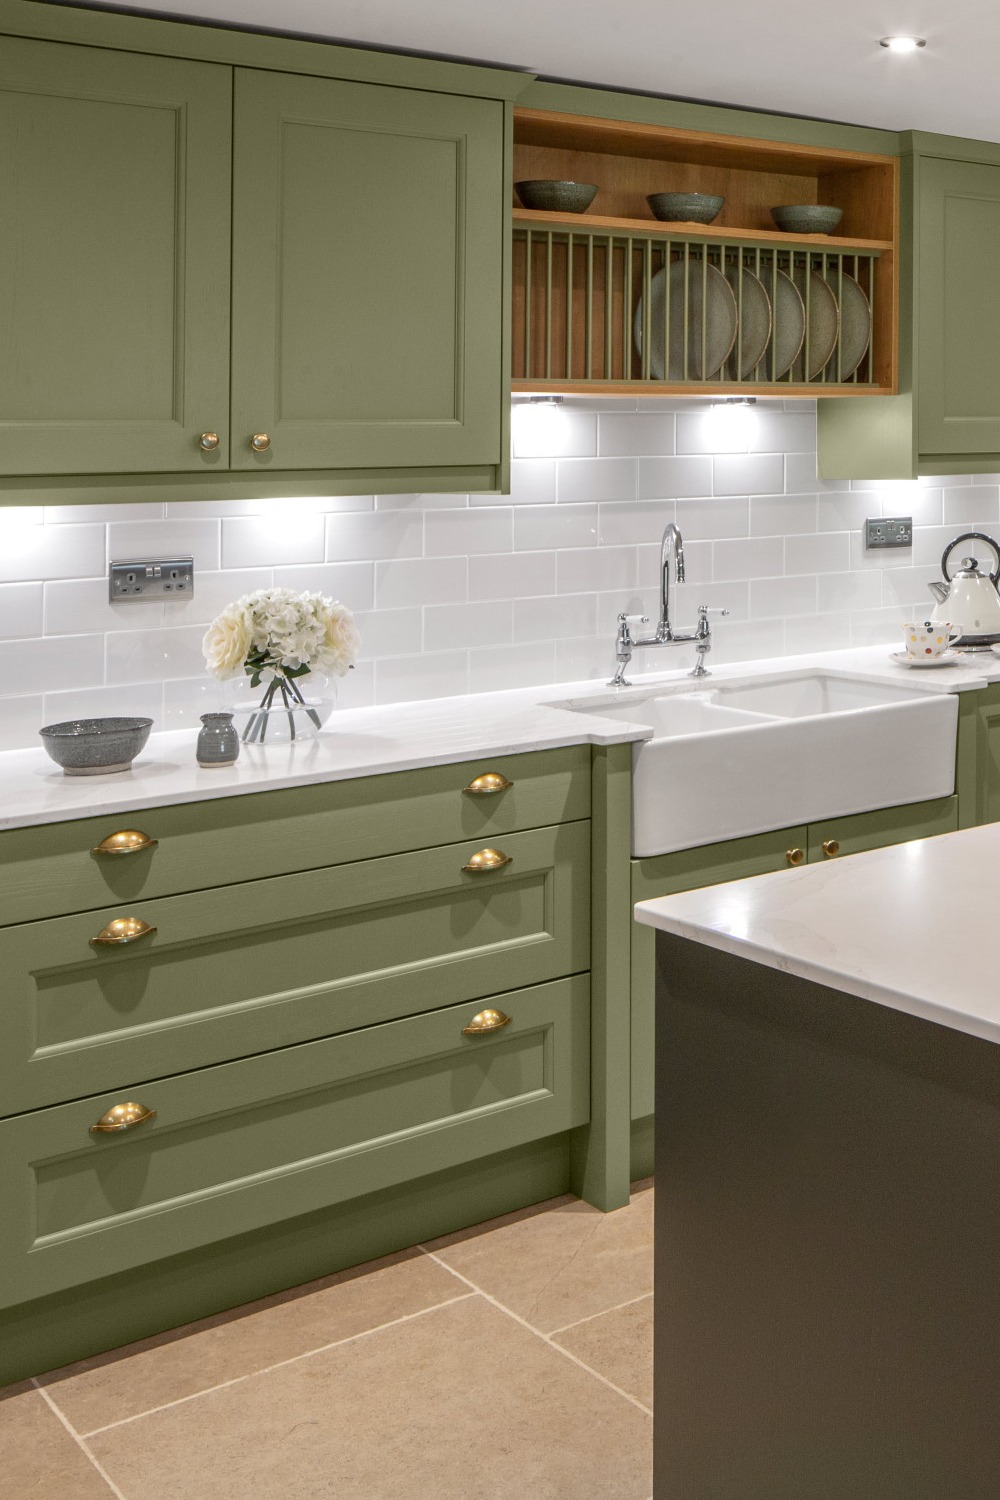 Green Base Cabinets List Items Shop Style Cabinetry Details Purchase Accessories Farm Sink Llc